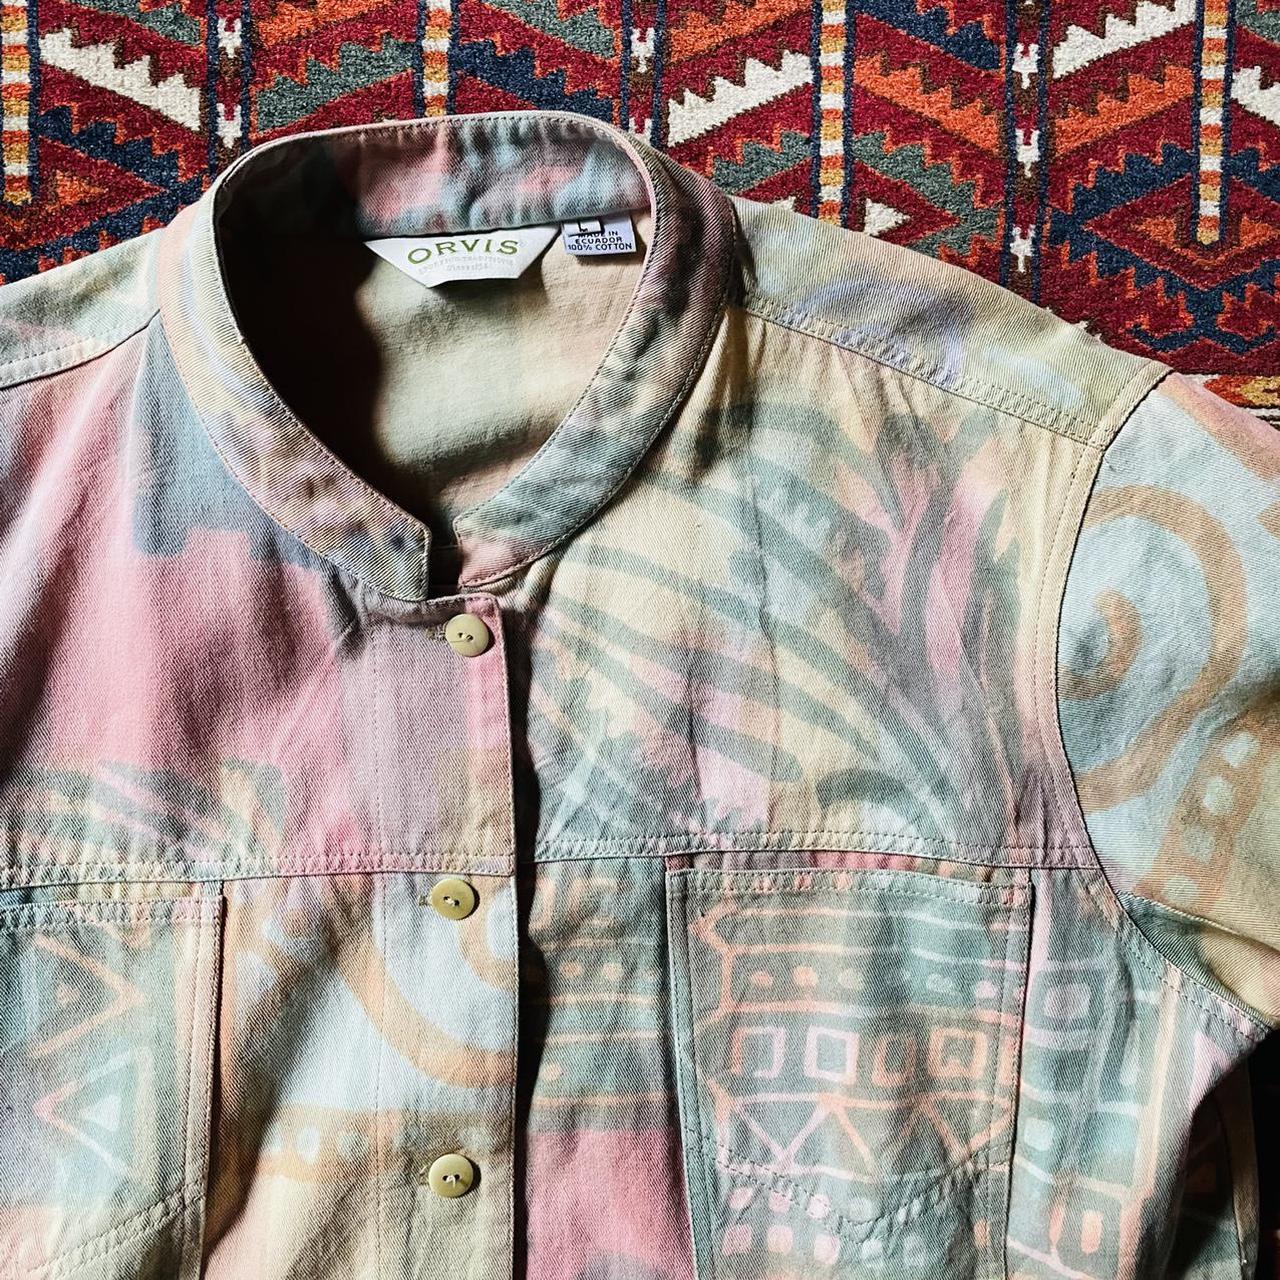 Orvis Canvas Jacket All Over Tropical Fish Print Vintage 80s